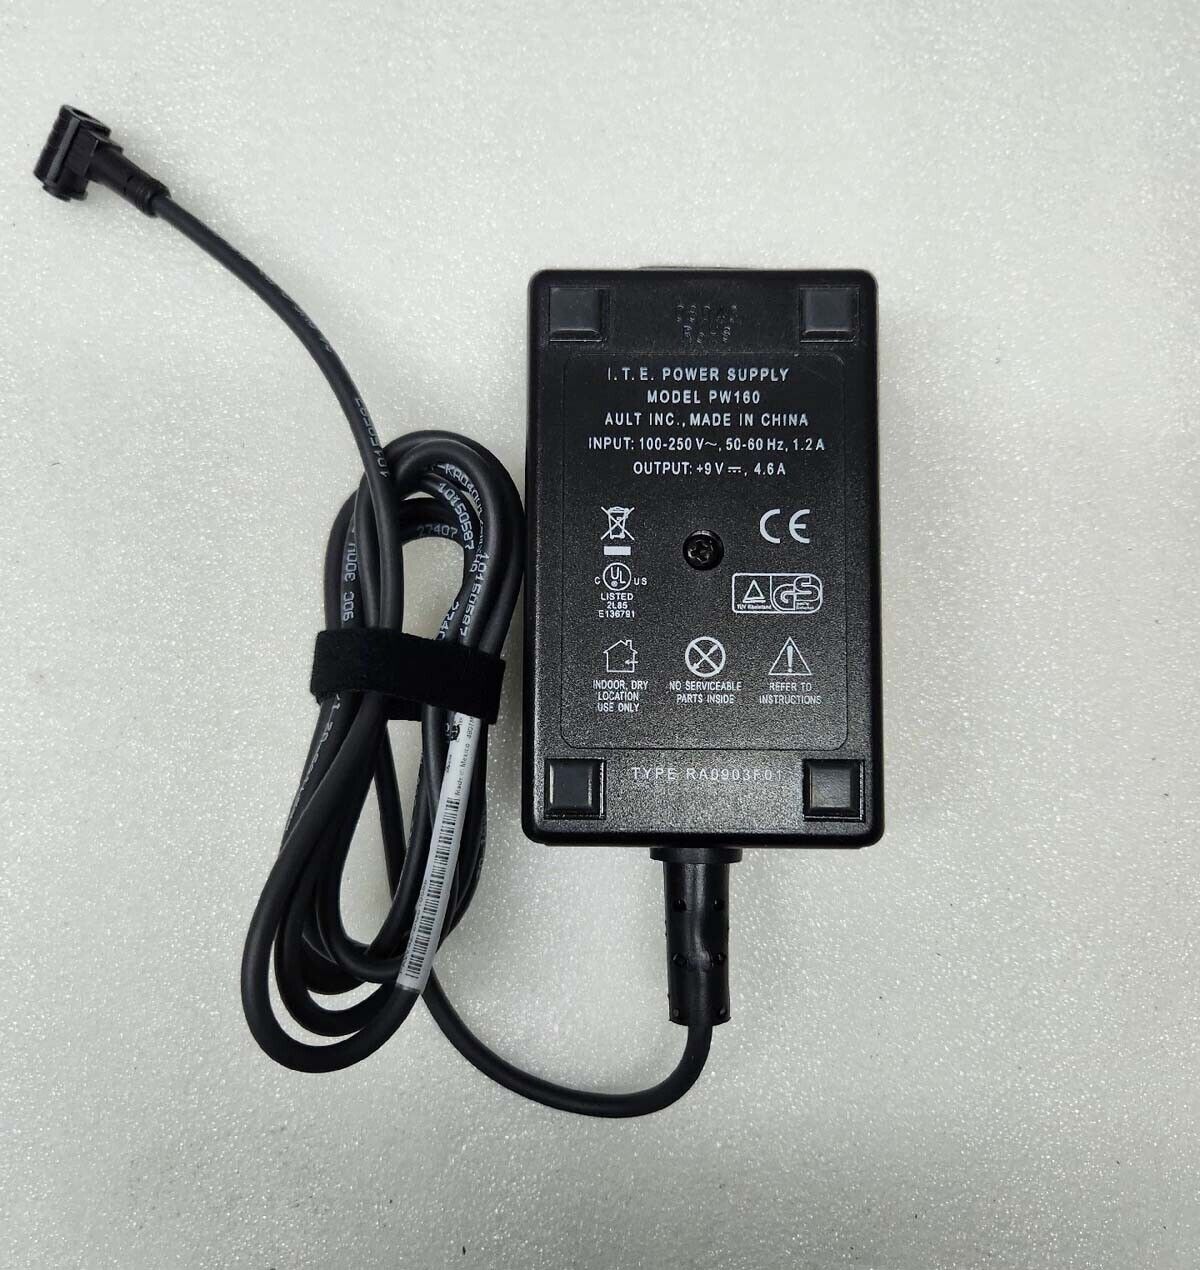 *Brand NEW* Genuine I.T.E AULT 9V 4.6A PW160 AC Adapter ChargerINC. 4-PIN Power Supply - Click Image to Close